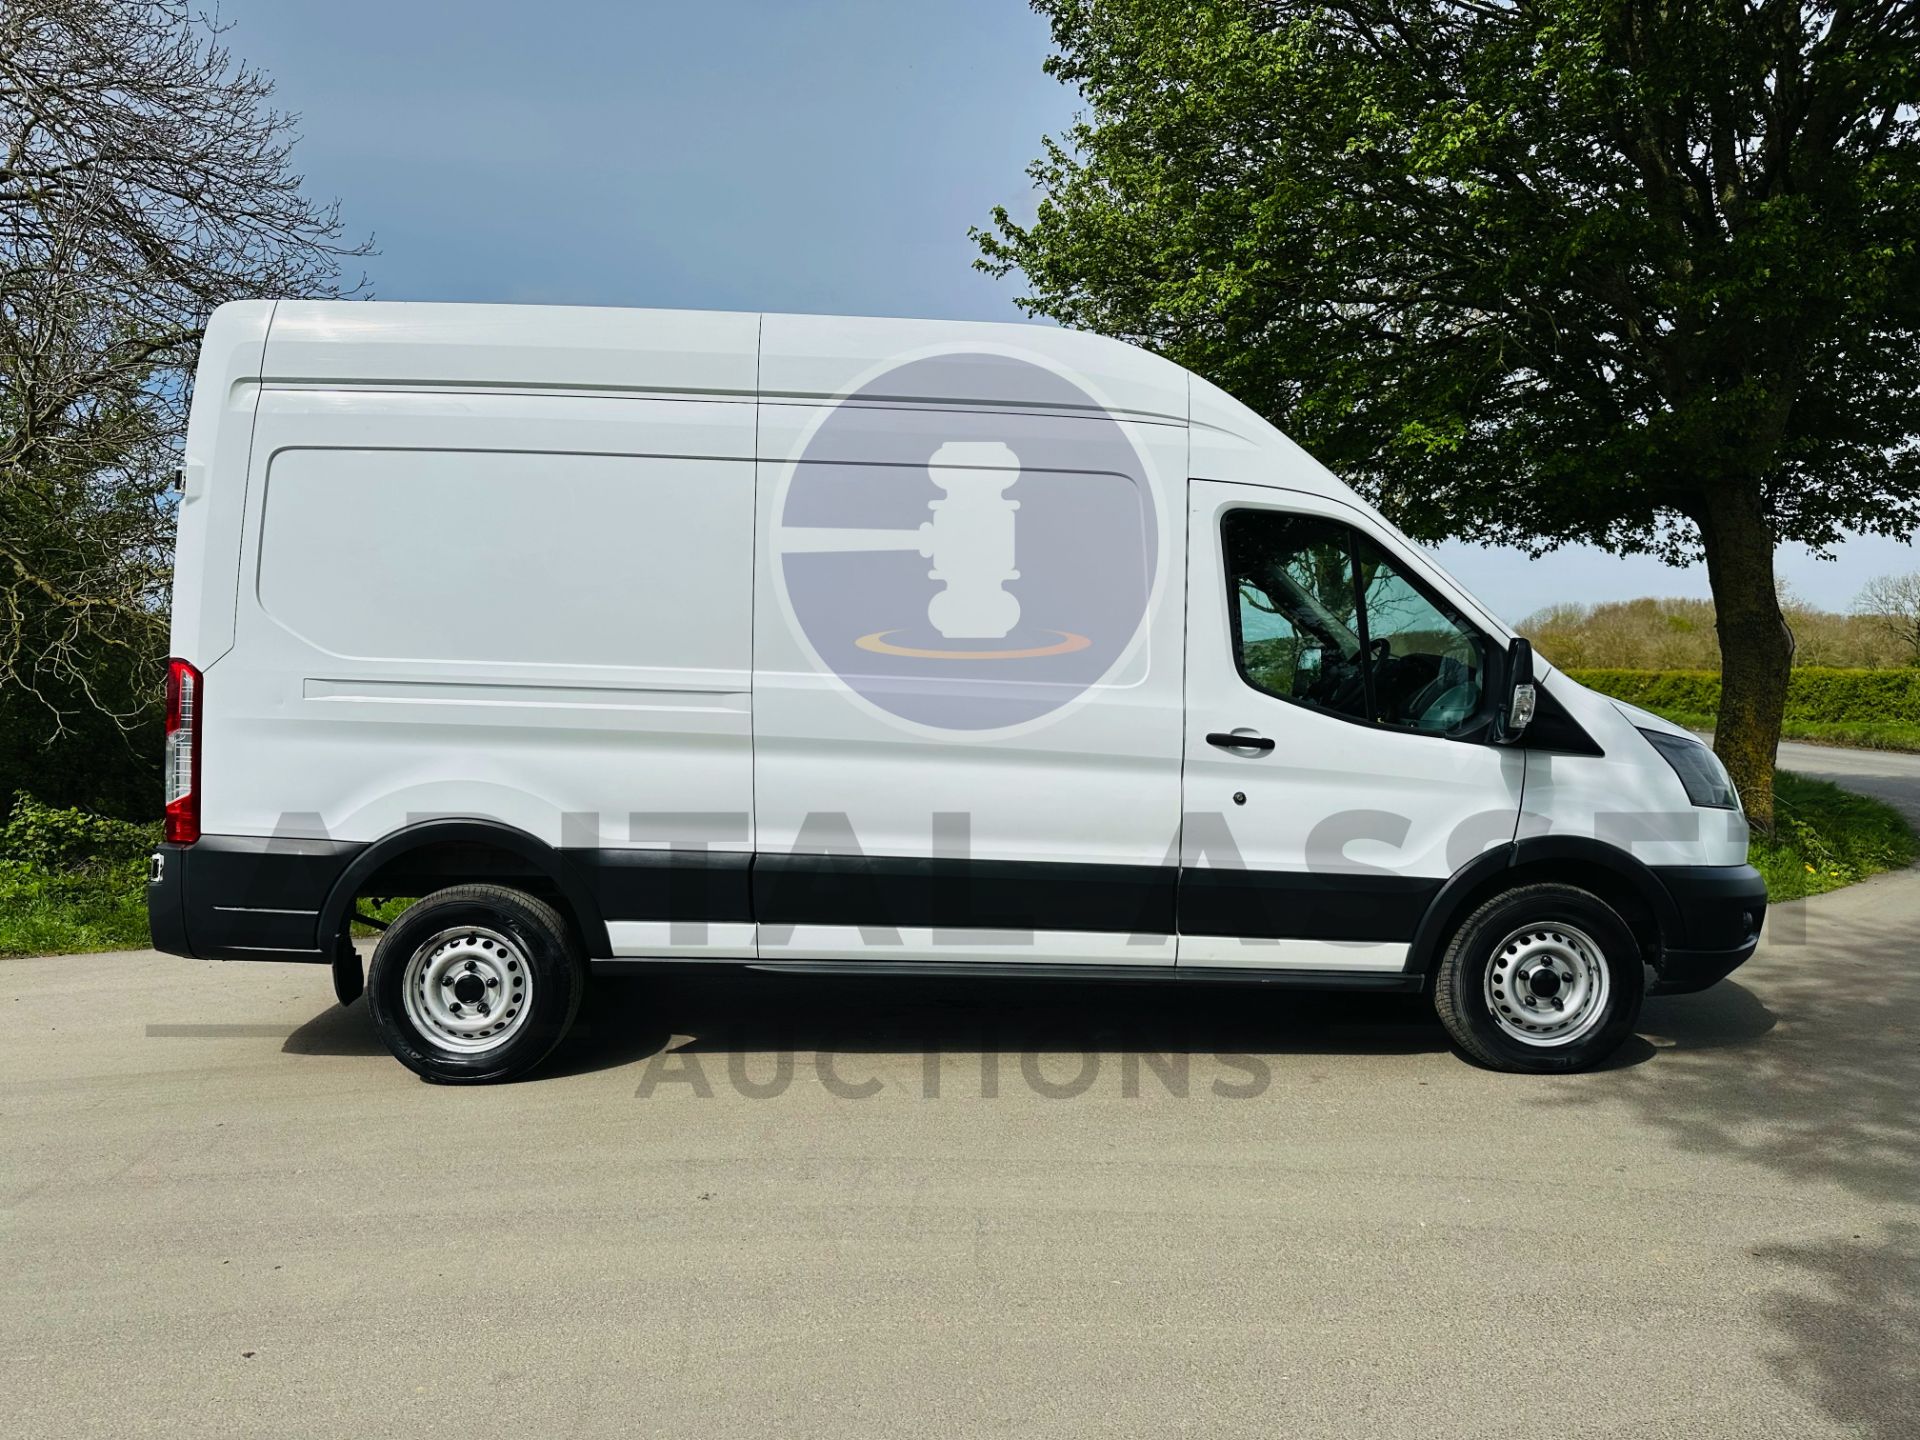 FORD TRANSIT 350 2.0 TDCI *ECOBLUE EDITION* LWB HIGH TOP - EURO 6 - 2019 MODEL - 1 OWNER - LOOK!!! - Image 10 of 32